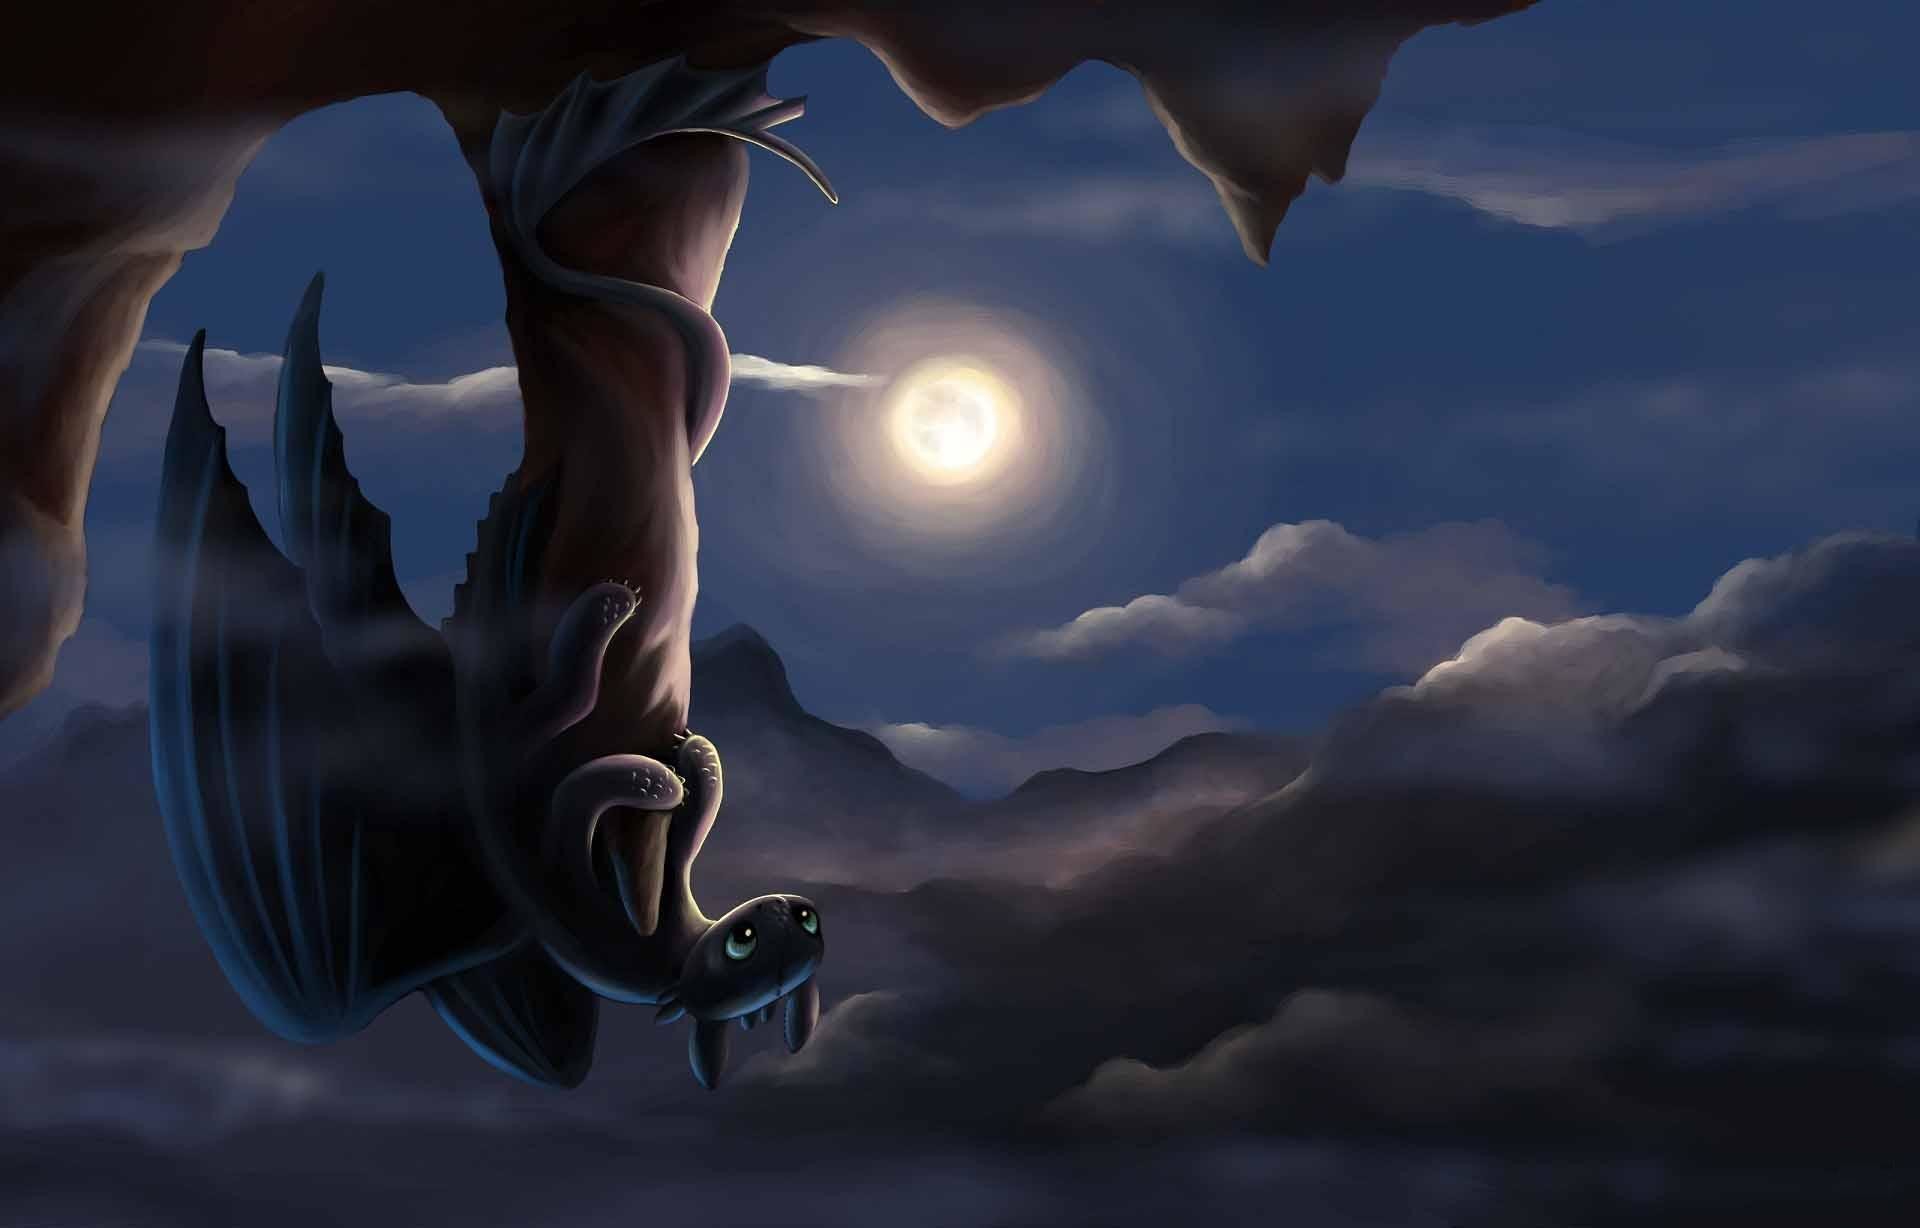 How To Train Your Dragon Hd Wallpapers Backgrounds 1920 1040 How To Train A Dragon 1920x1228